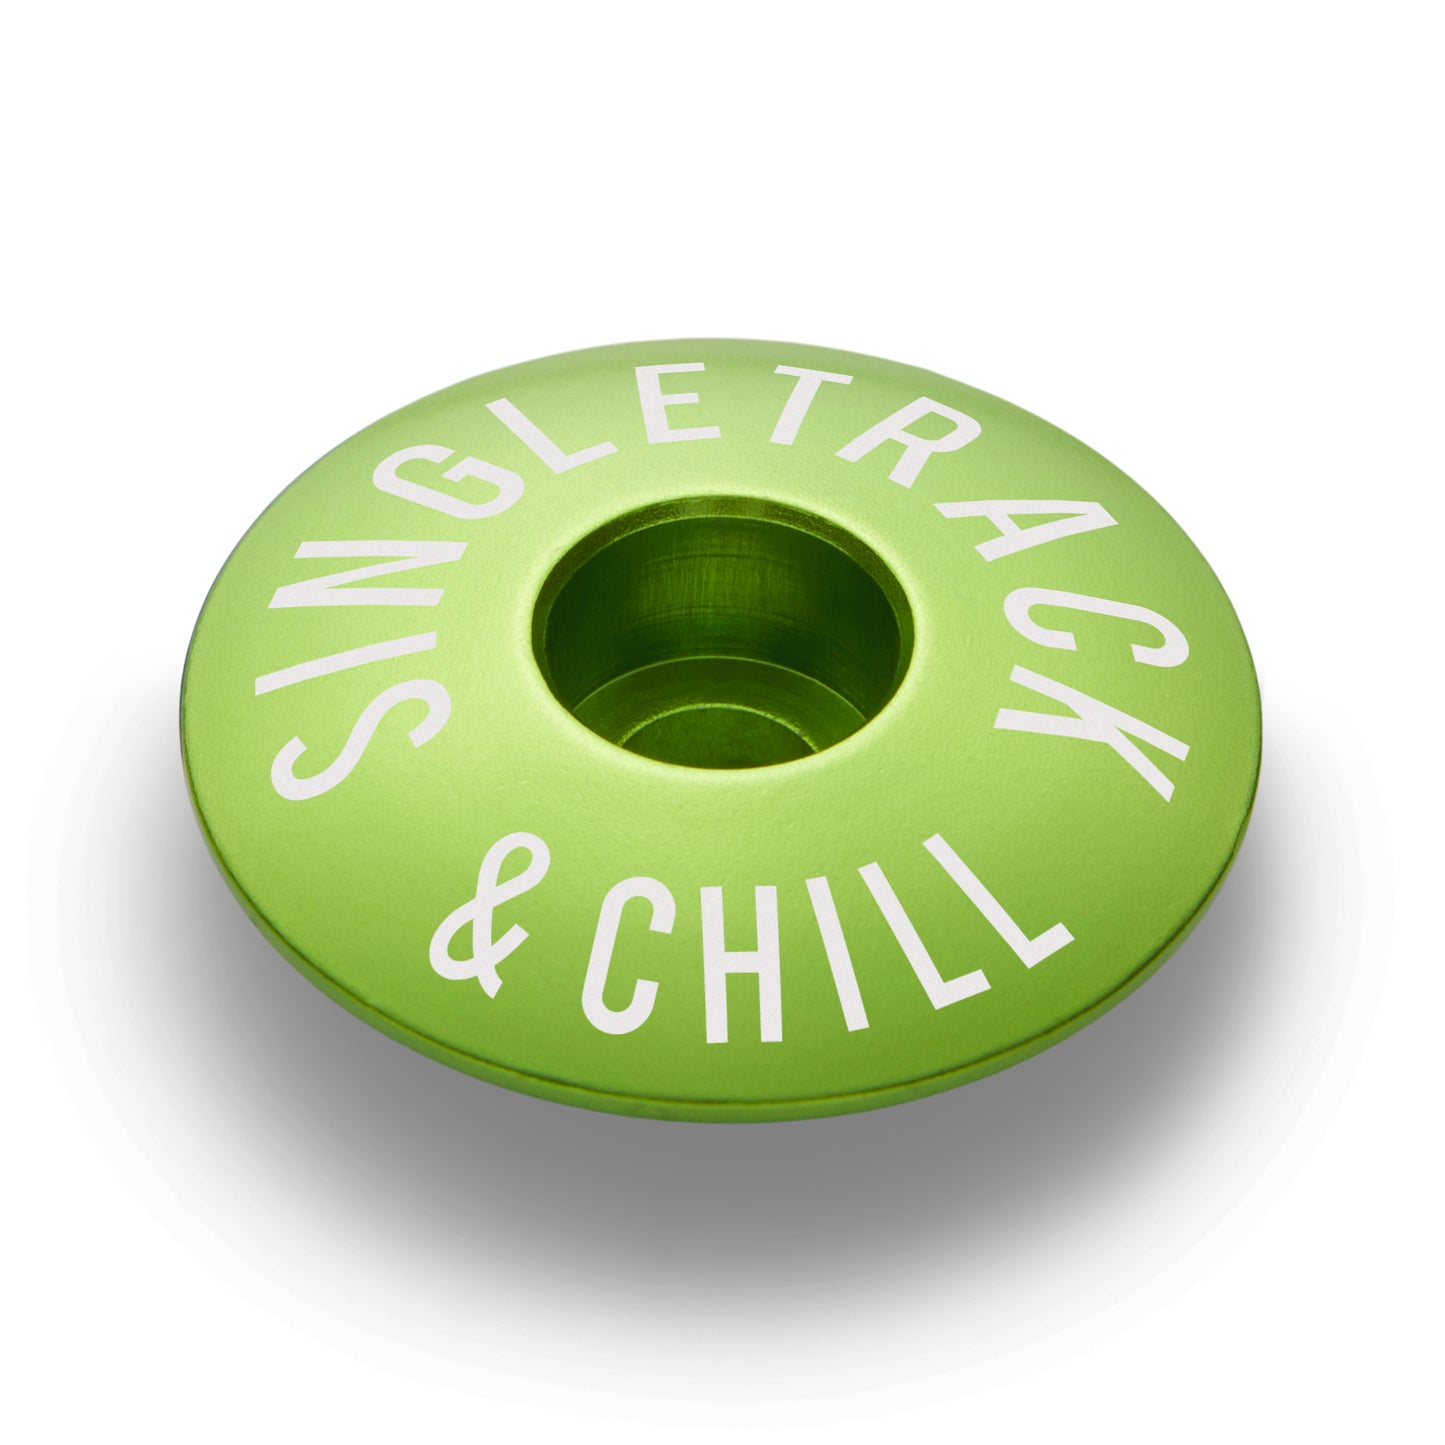 Singletrack & Chill Bicycle Headset Cap